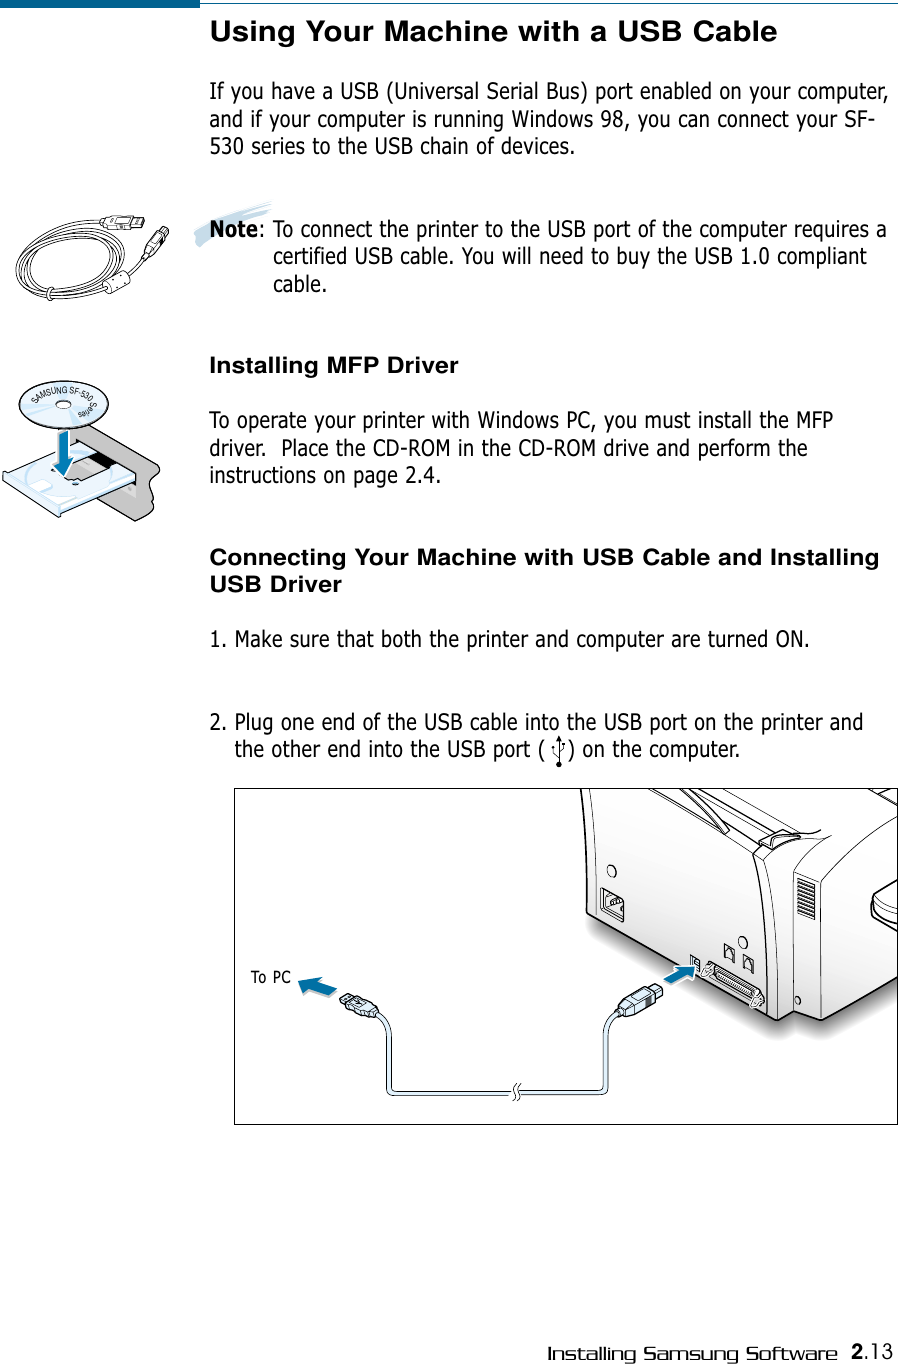 2.13Installing Samsung SoftwareUsing Your Machine with a USB CableIf you have a USB (Universal Serial Bus) port enabled on your computer,and if your computer is running Windows 98, you can connect your SF-530 series to the USB chain of devices.Note: To connect the printer to the USB port of the computer requires acertified USB cable. You will need to buy the USB 1.0 compliantcable.Installing MFP Driver To operate your printer with Windows PC, you must install the MFPdriver.  Place the CD-ROM in the CD-ROM drive and perform theinstructions on page 2.4.Connecting Your Machine with USB Cable and InstallingUSB Driver1. Make sure that both the printer and computer are turned ON.2. Plug one end of the USB cable into the USB port on the printer andthe other end into the USB port (   ) on the computer.000000000000000000000000000000000000000000000000000000000000000000000To PCSAMSUNGSF-530Series